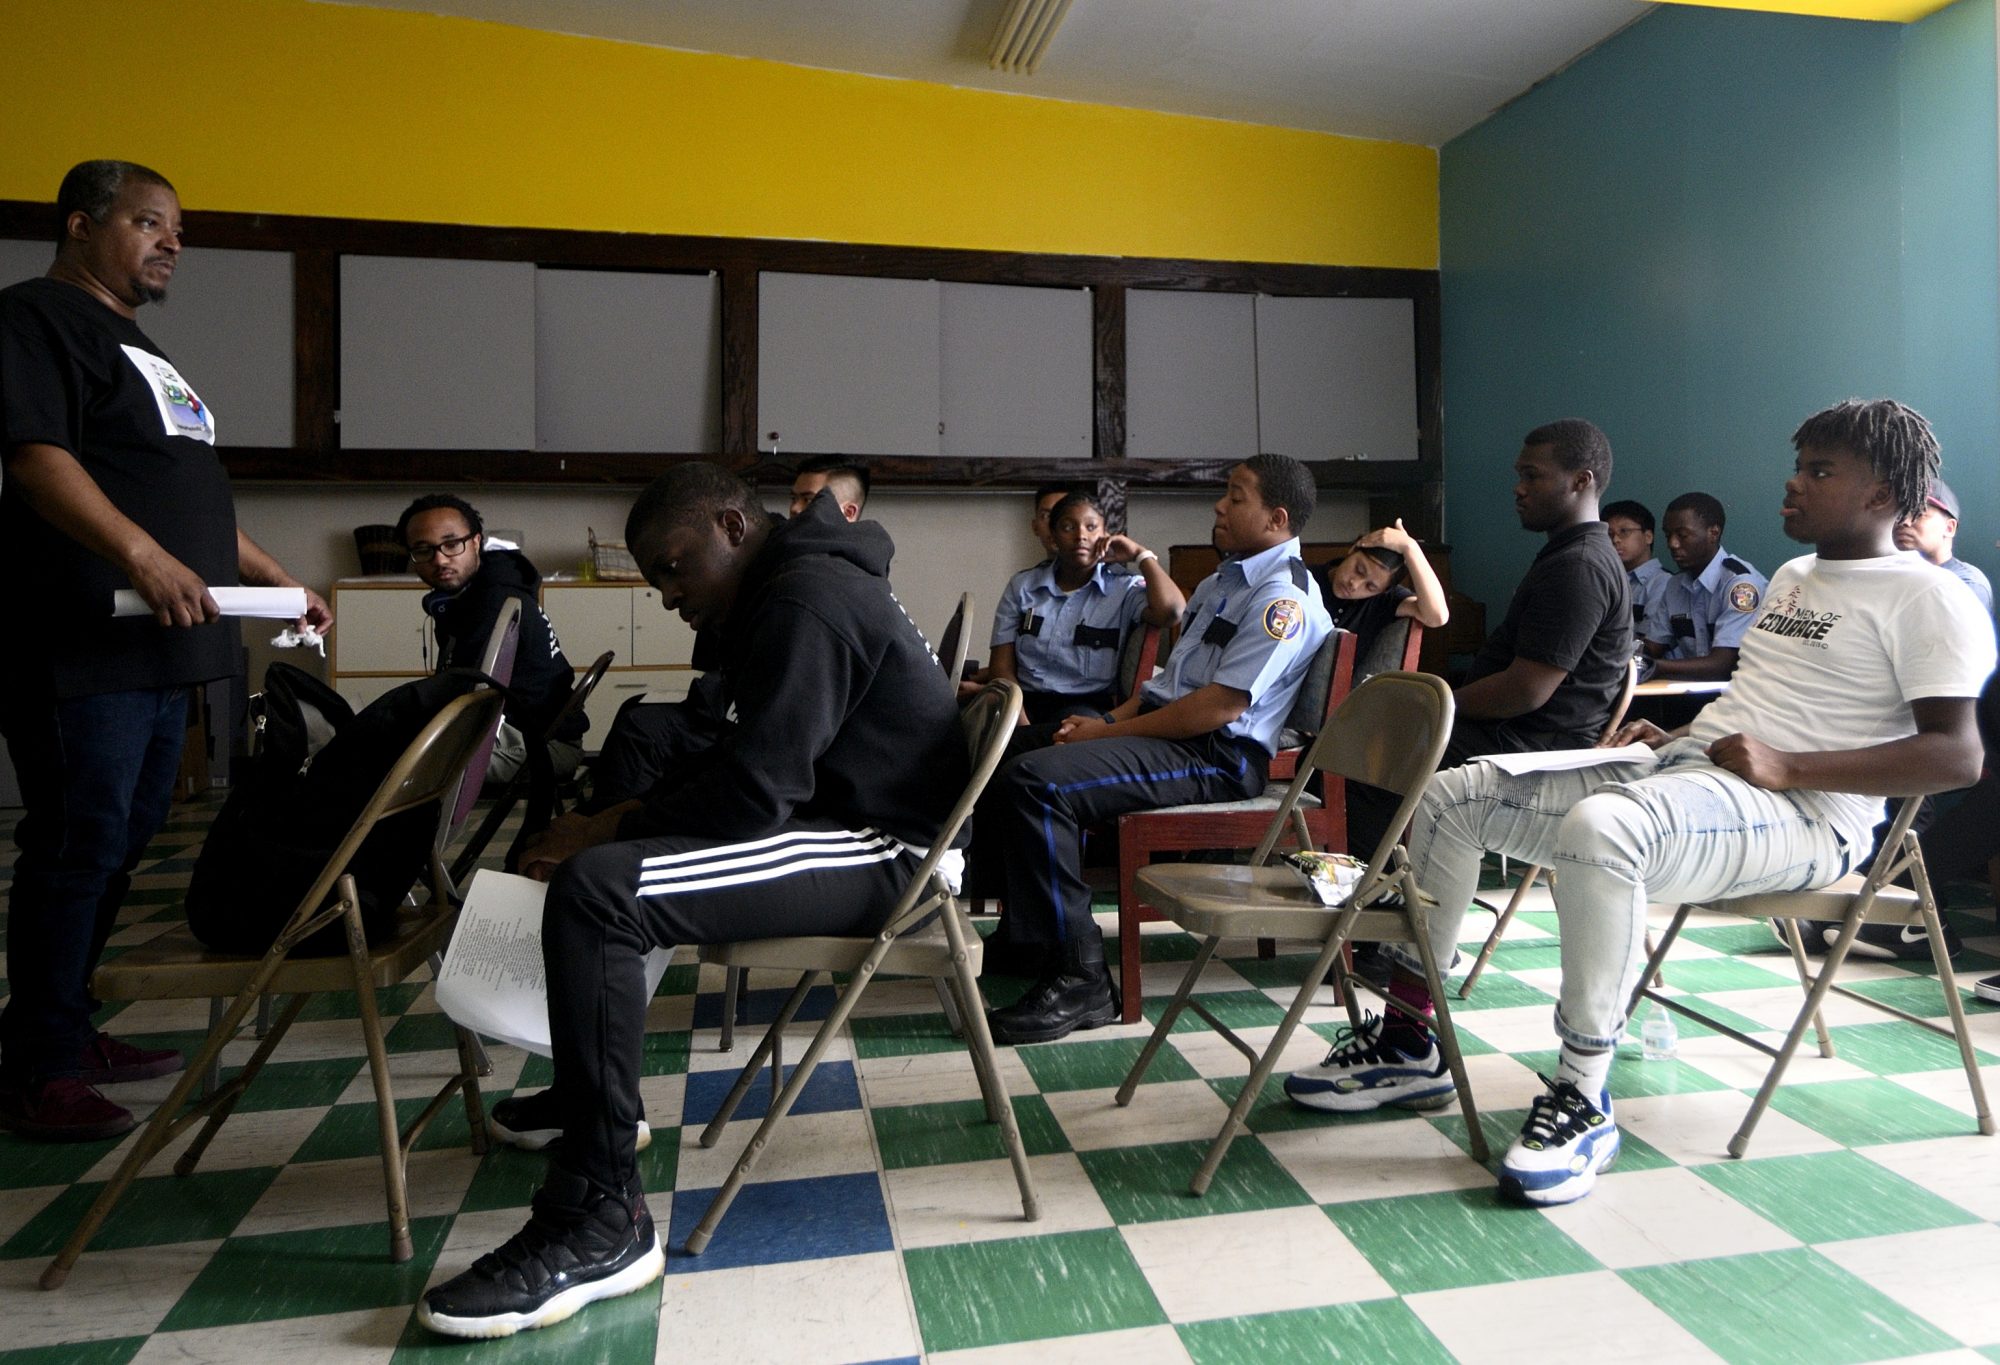 Mental health summit in Olney uses hip-hop as therapy